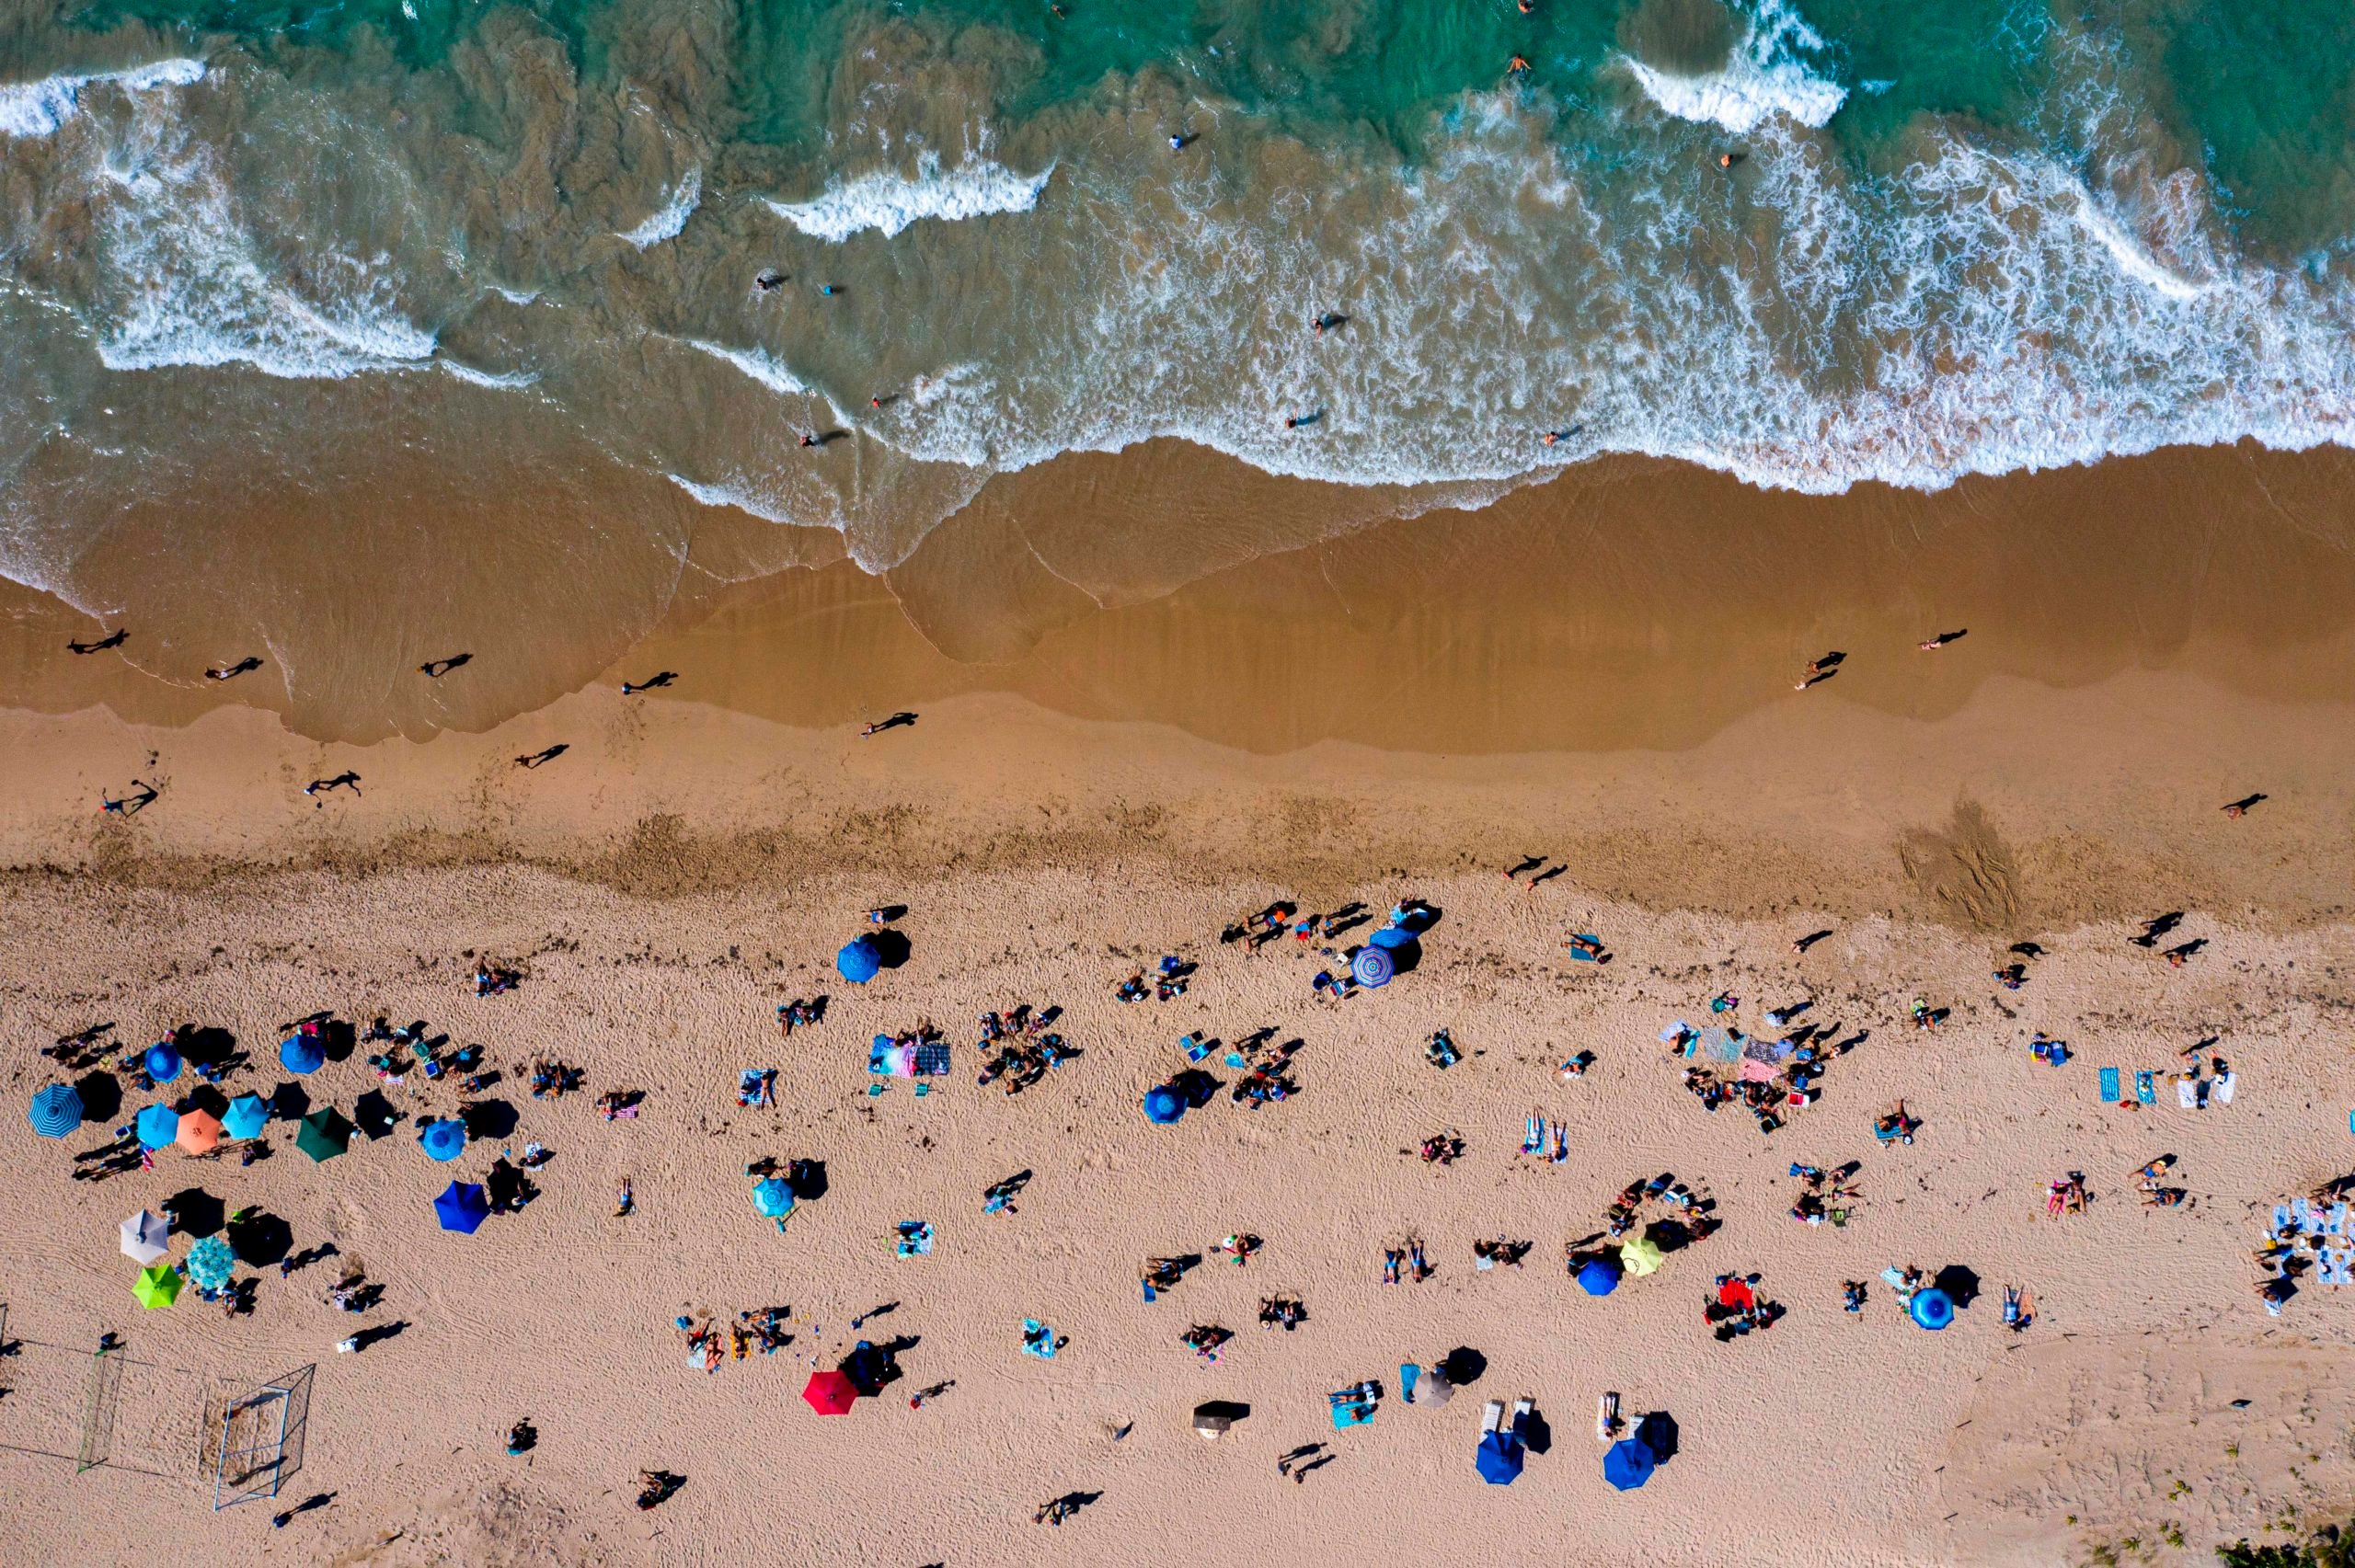 People are seen on the beach in San Juan Puerto Rico on March 15, 2020. (Ricardo Arduengo/AFP via Getty Images)